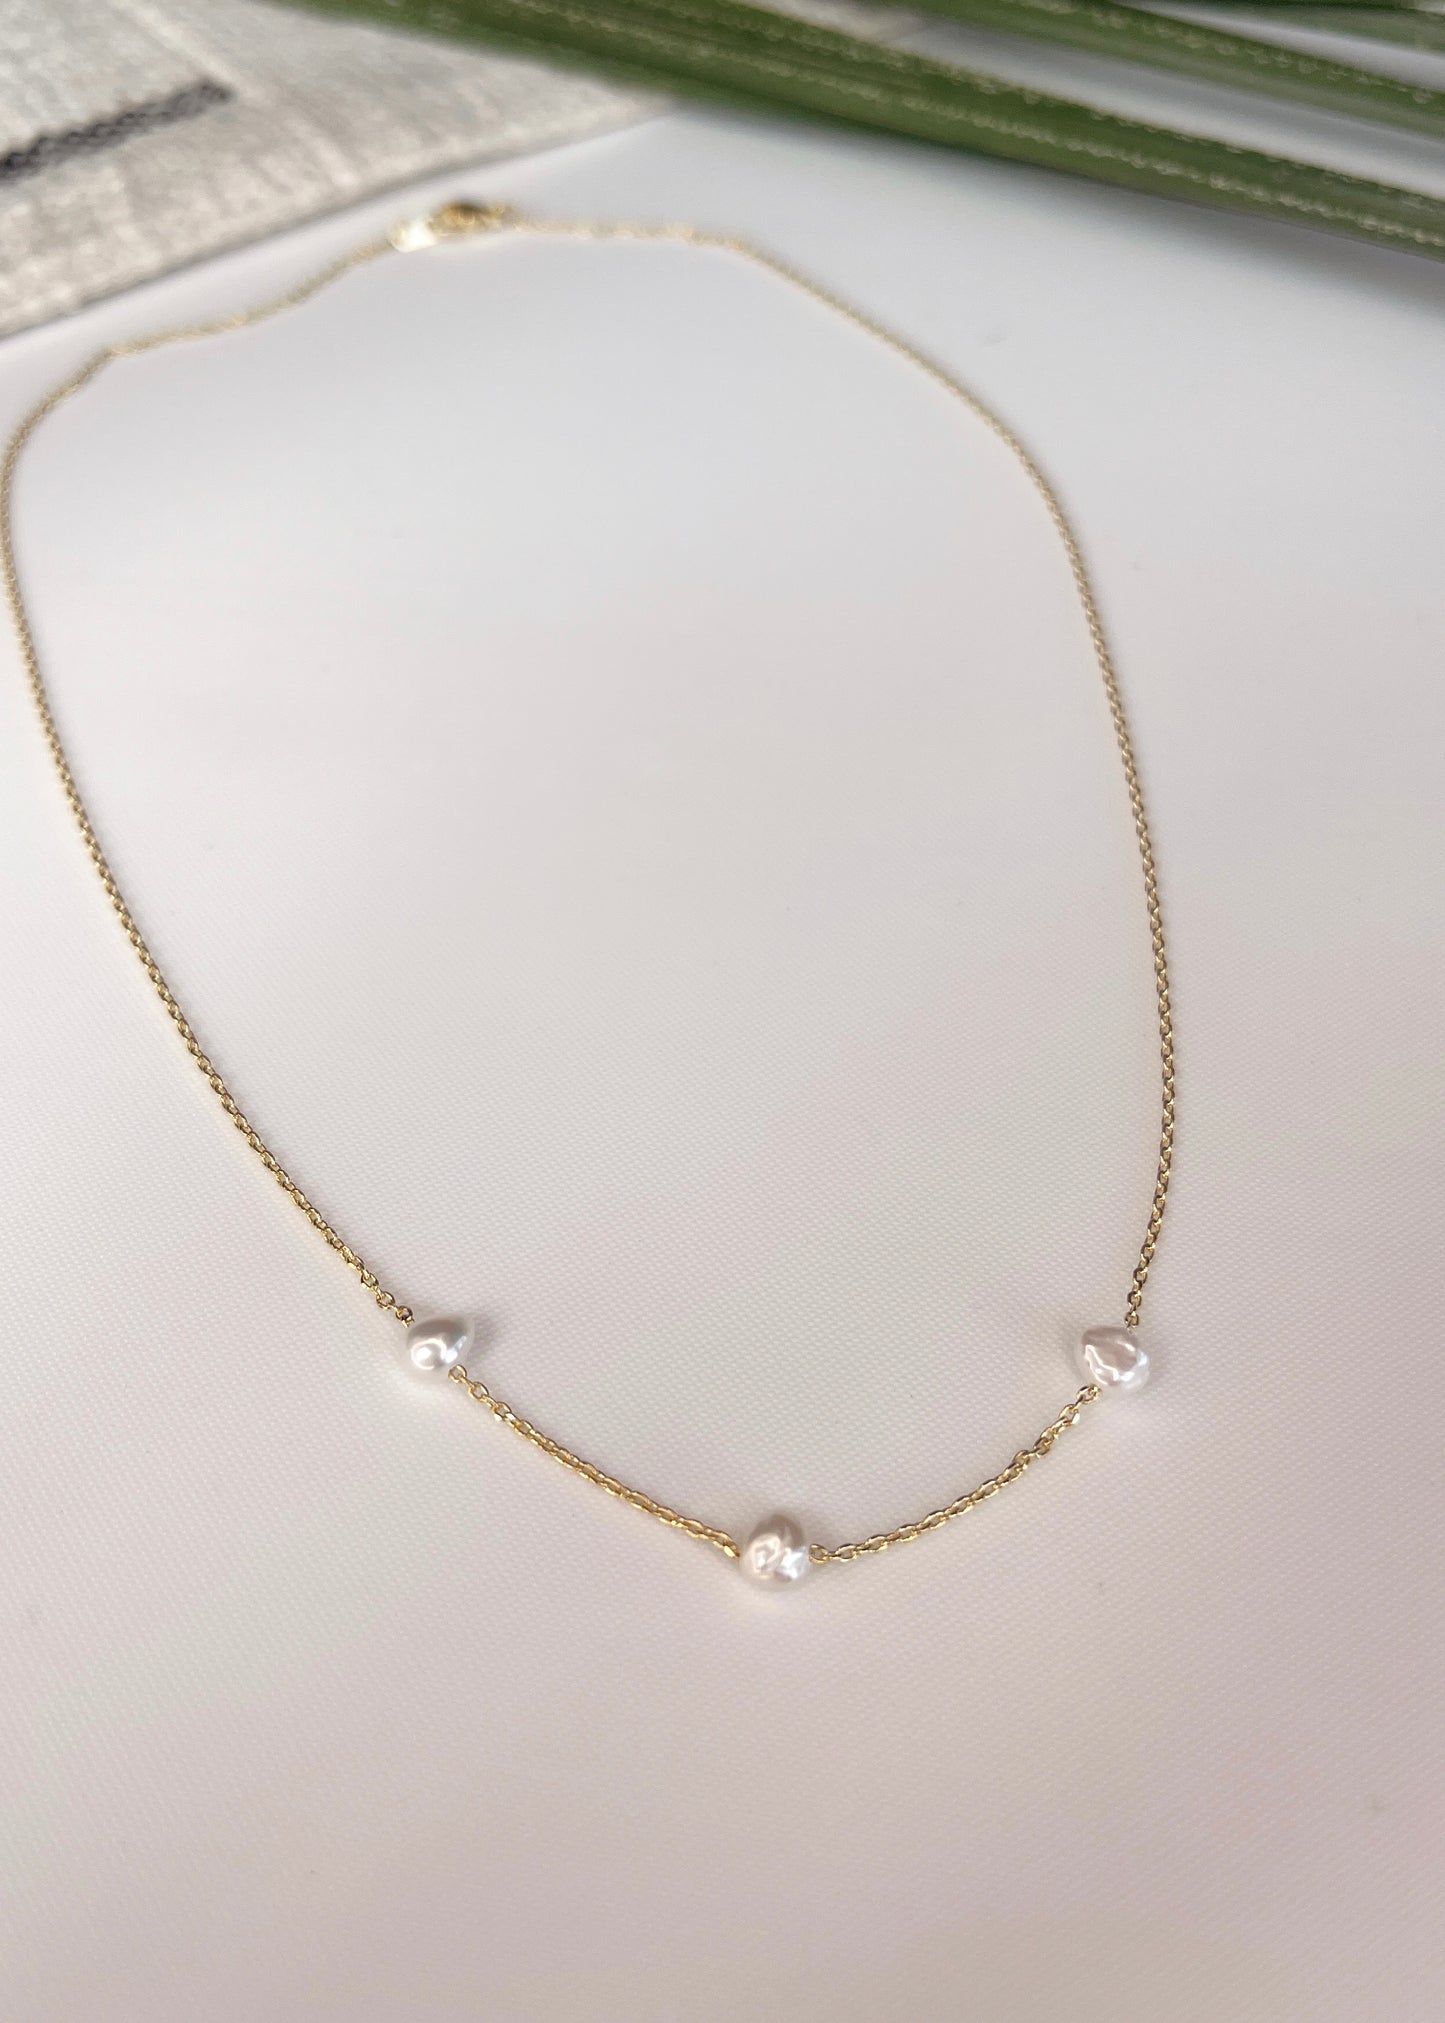 "Arielle" pearl necklace